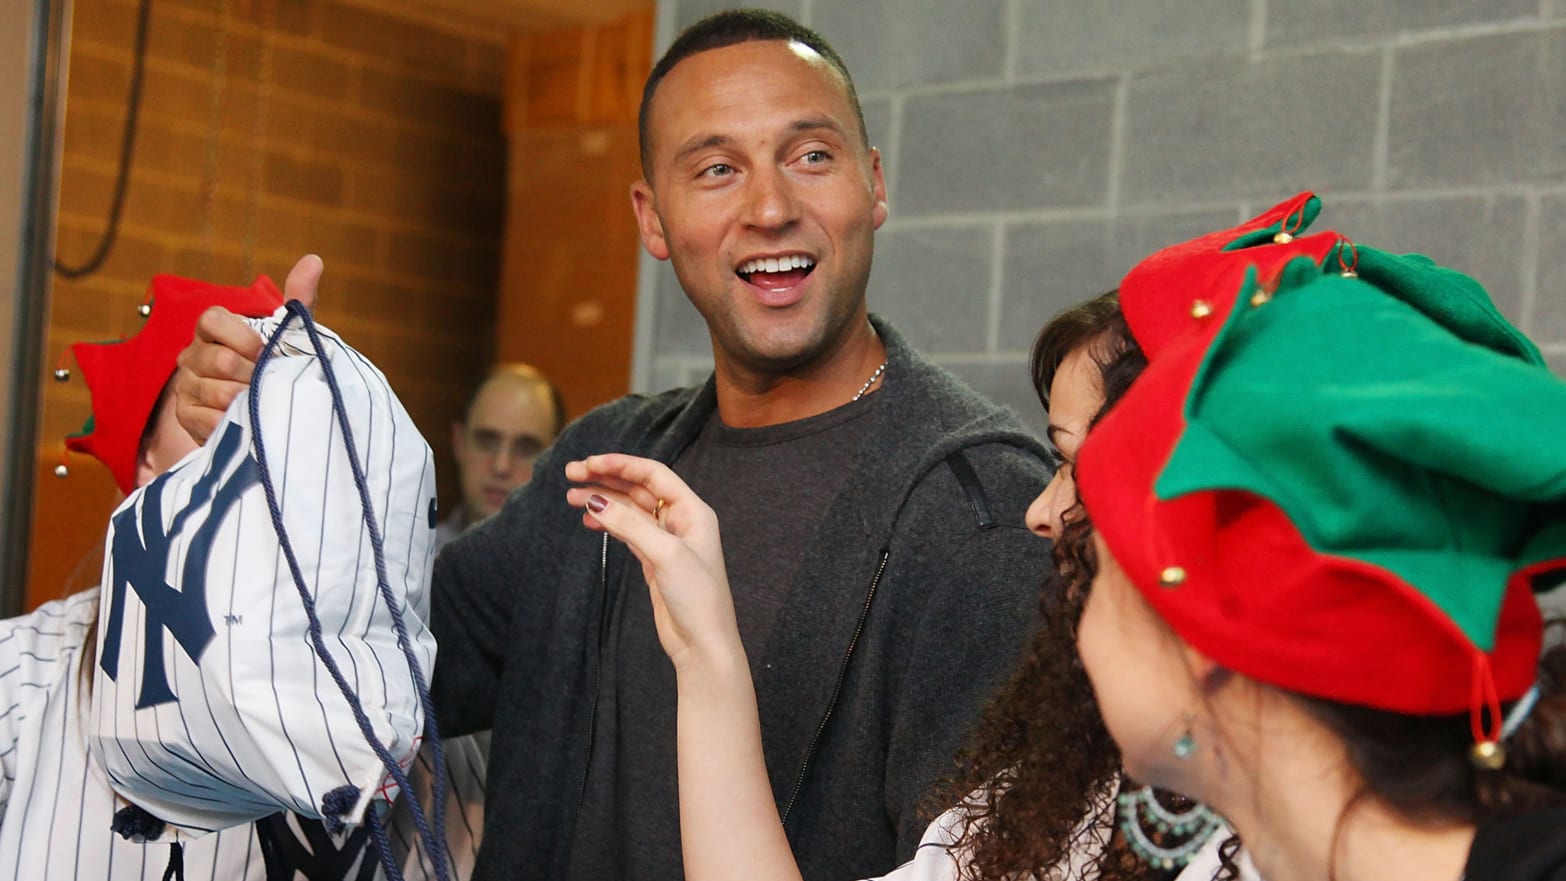 Derek Jeter adds a bronze bat to his collection of farewell gifts